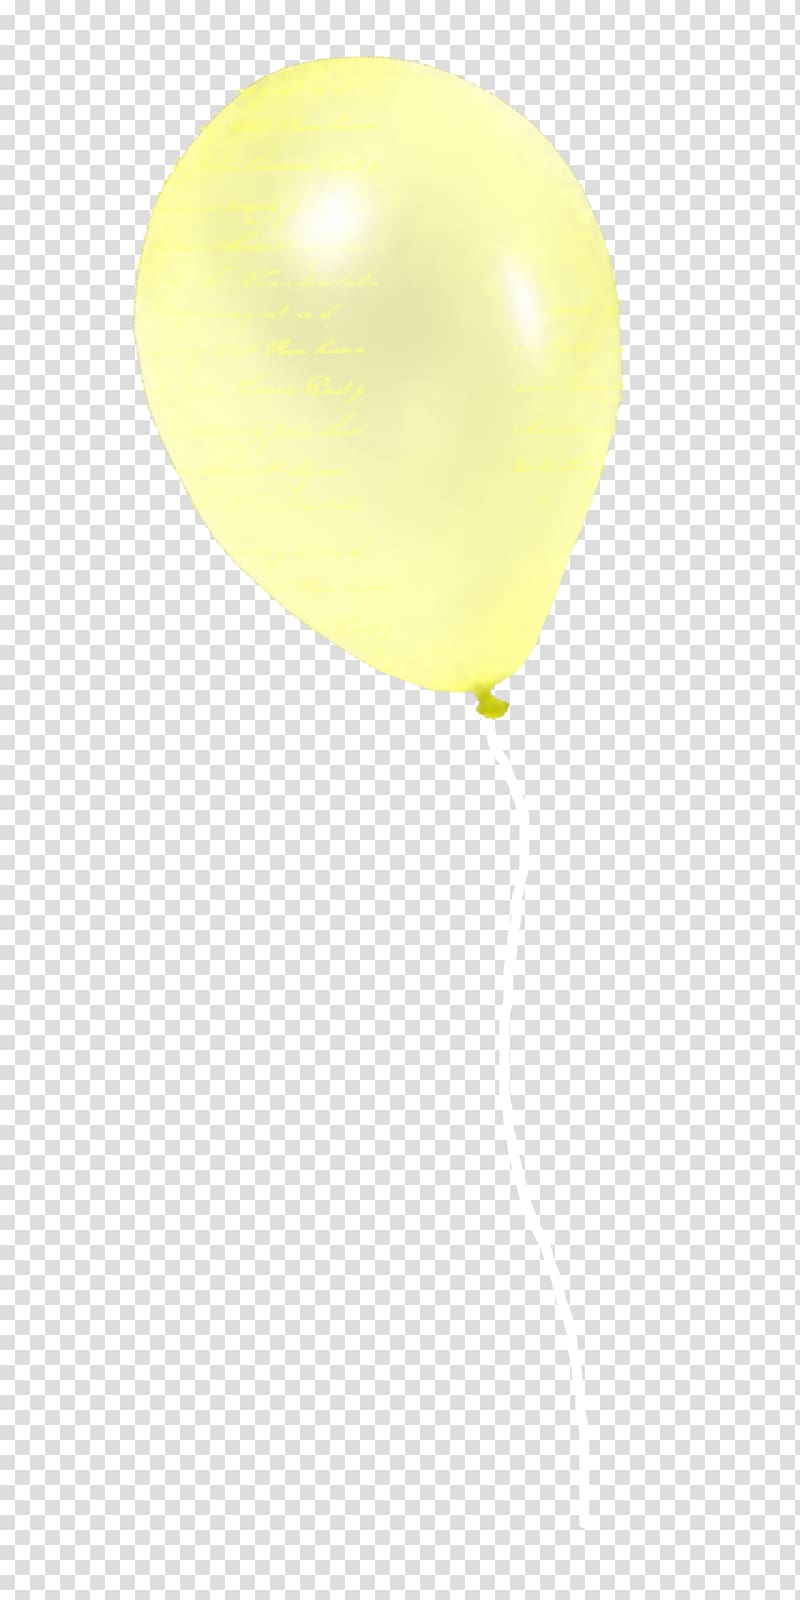 Balloon Yellow, Yellow Balloon transparent background PNG clipart